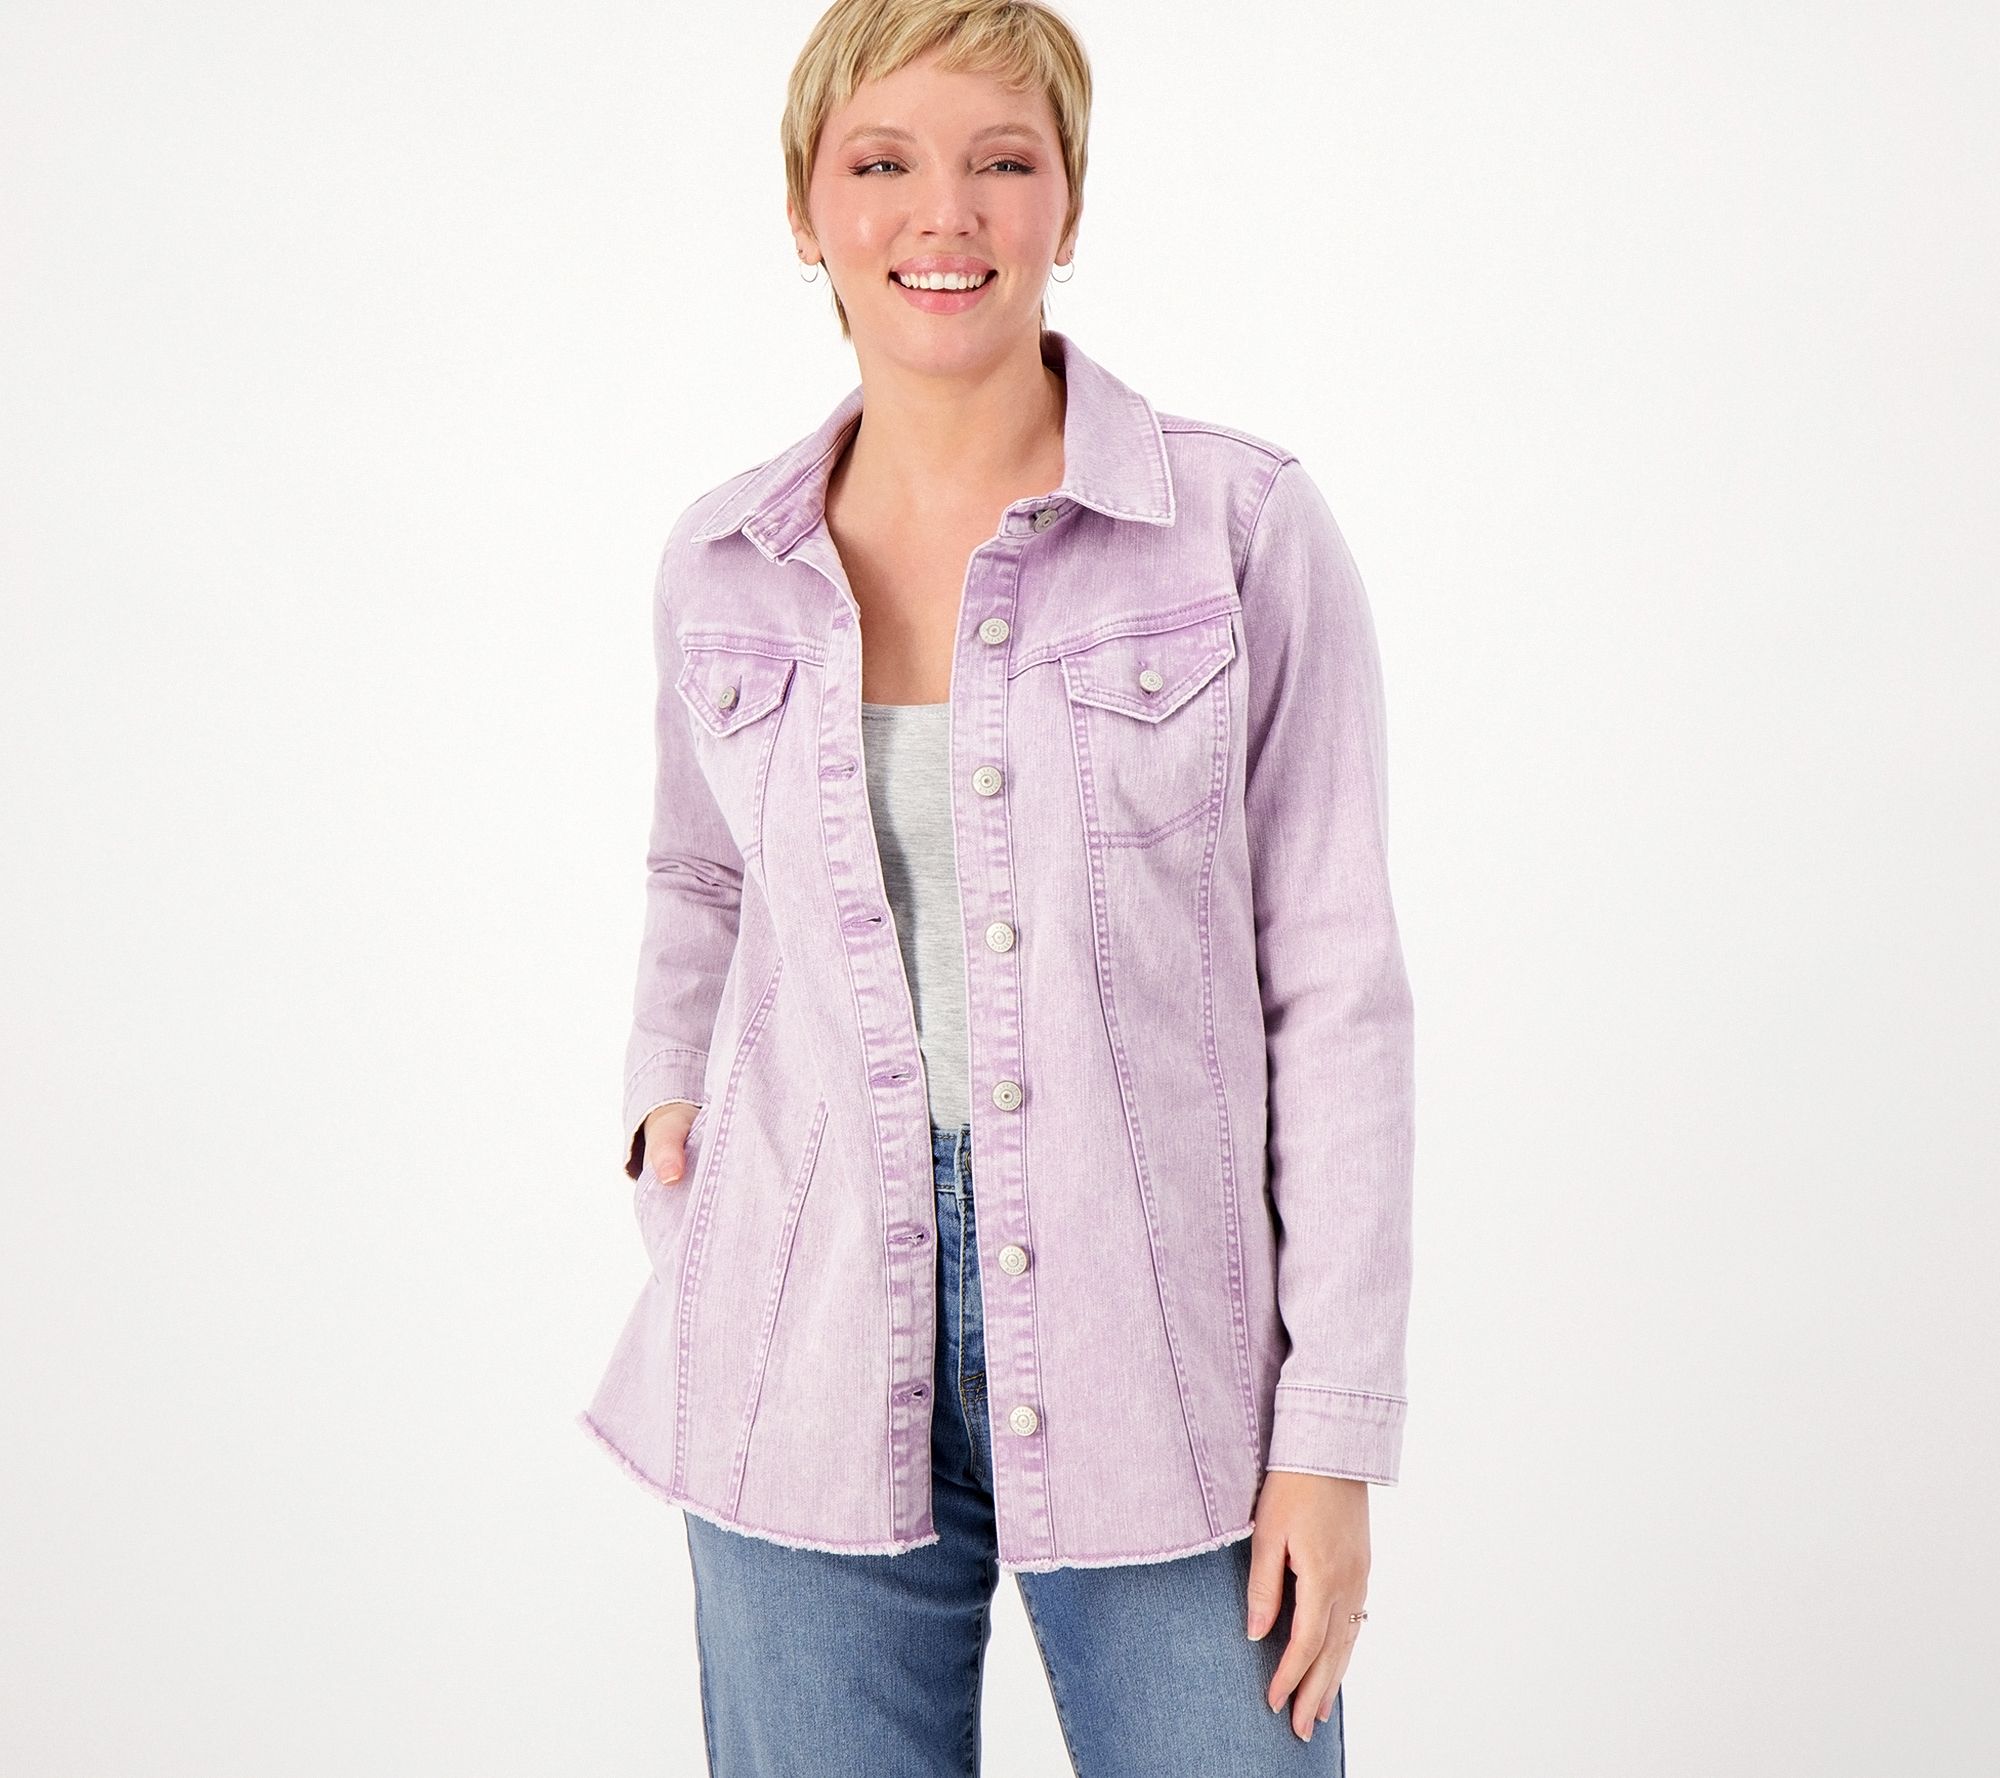 Distressed purple Denim Jacket with patches